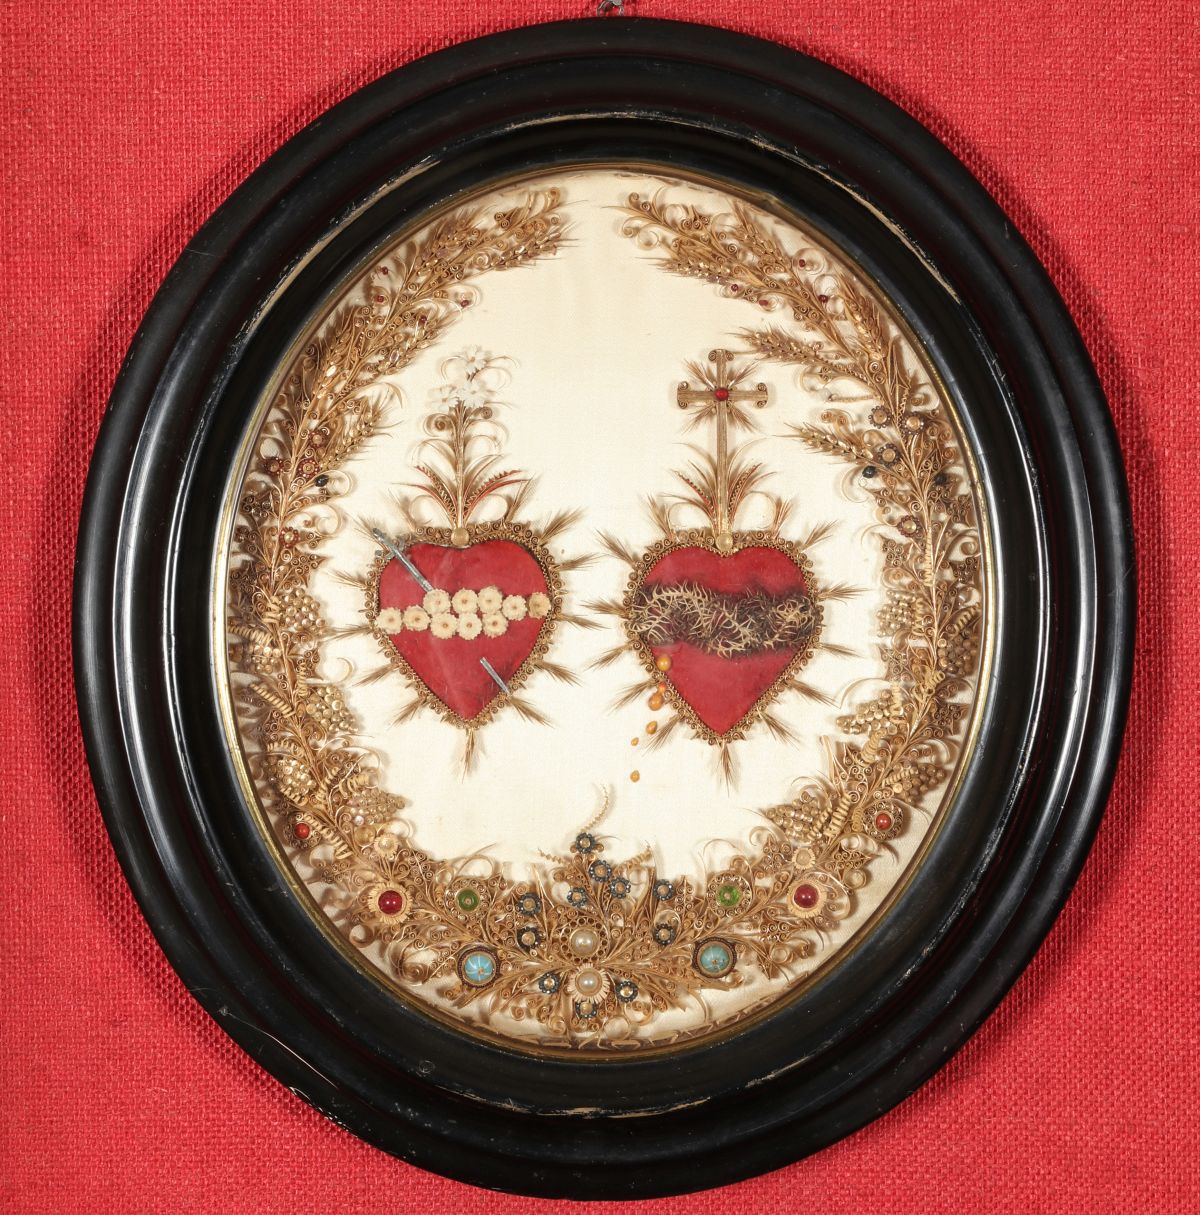 FRENCH 19TH C. QUILLED PAPER CONVENT WORK IN FRAME